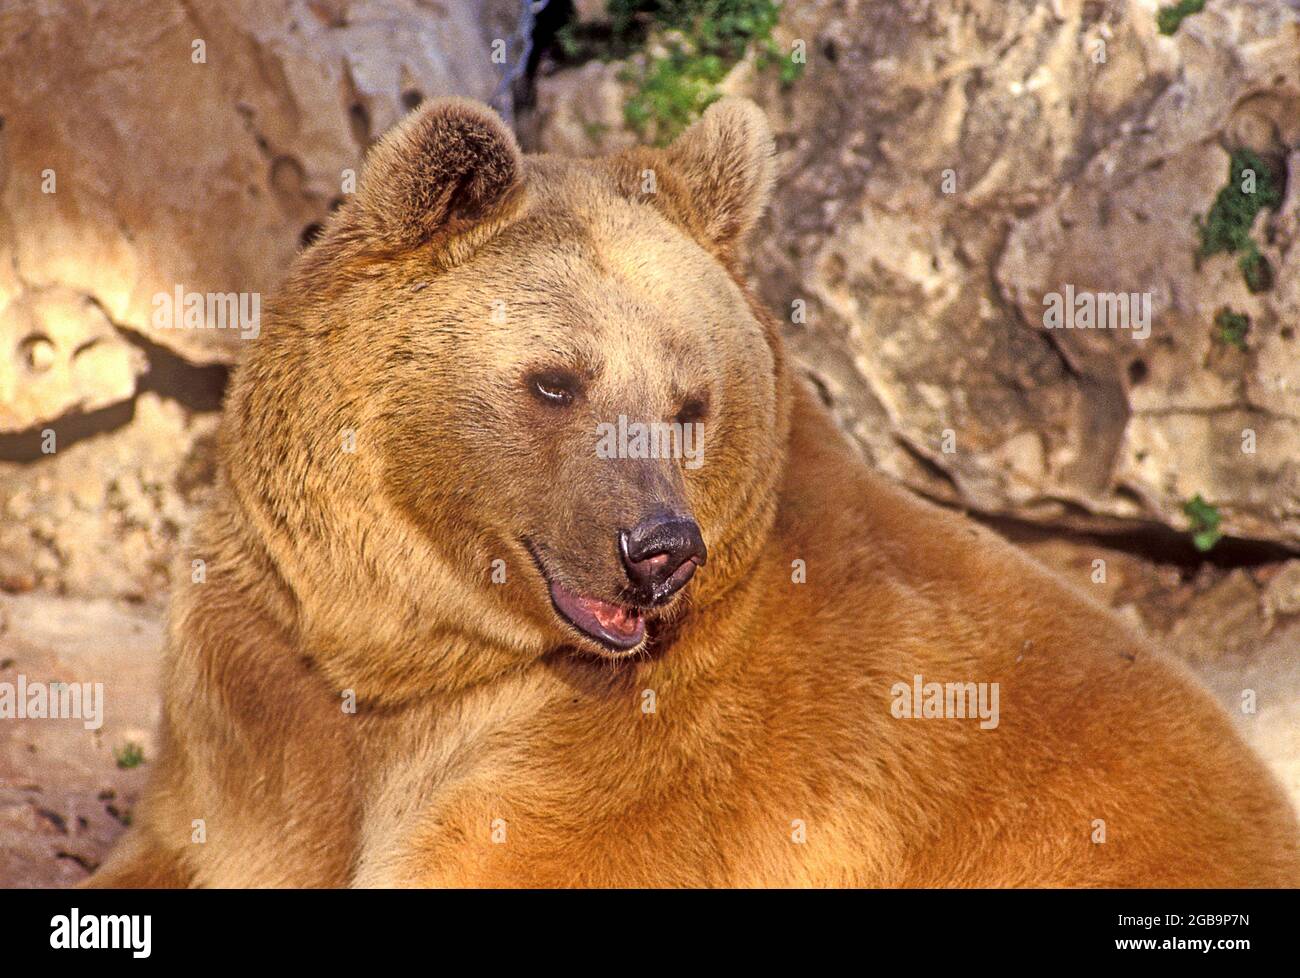 The Syrian brown bear (Ursus arctos syriacus or Ursus arctos arctos) is a relatively small subspecies of brown bear native to the Middle East and the Stock Photo